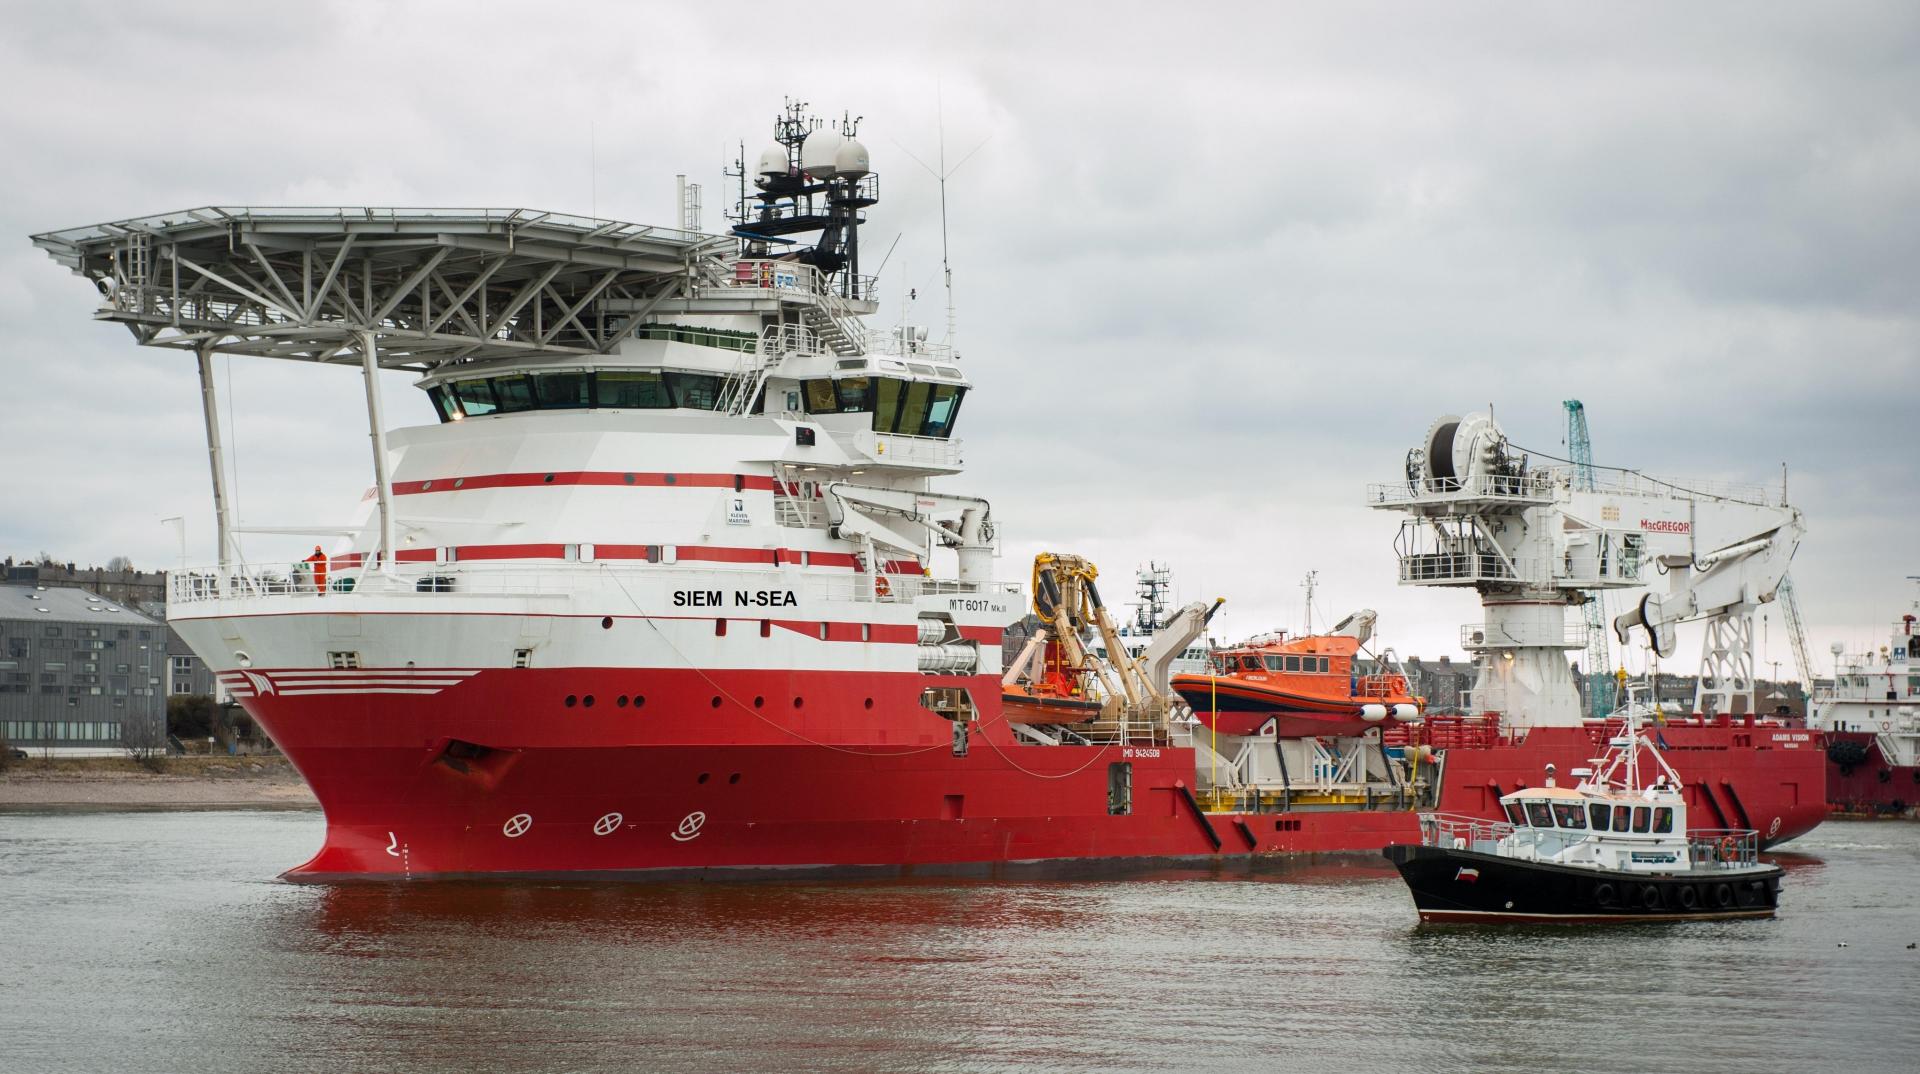 Aberdeen subsea company enters administration